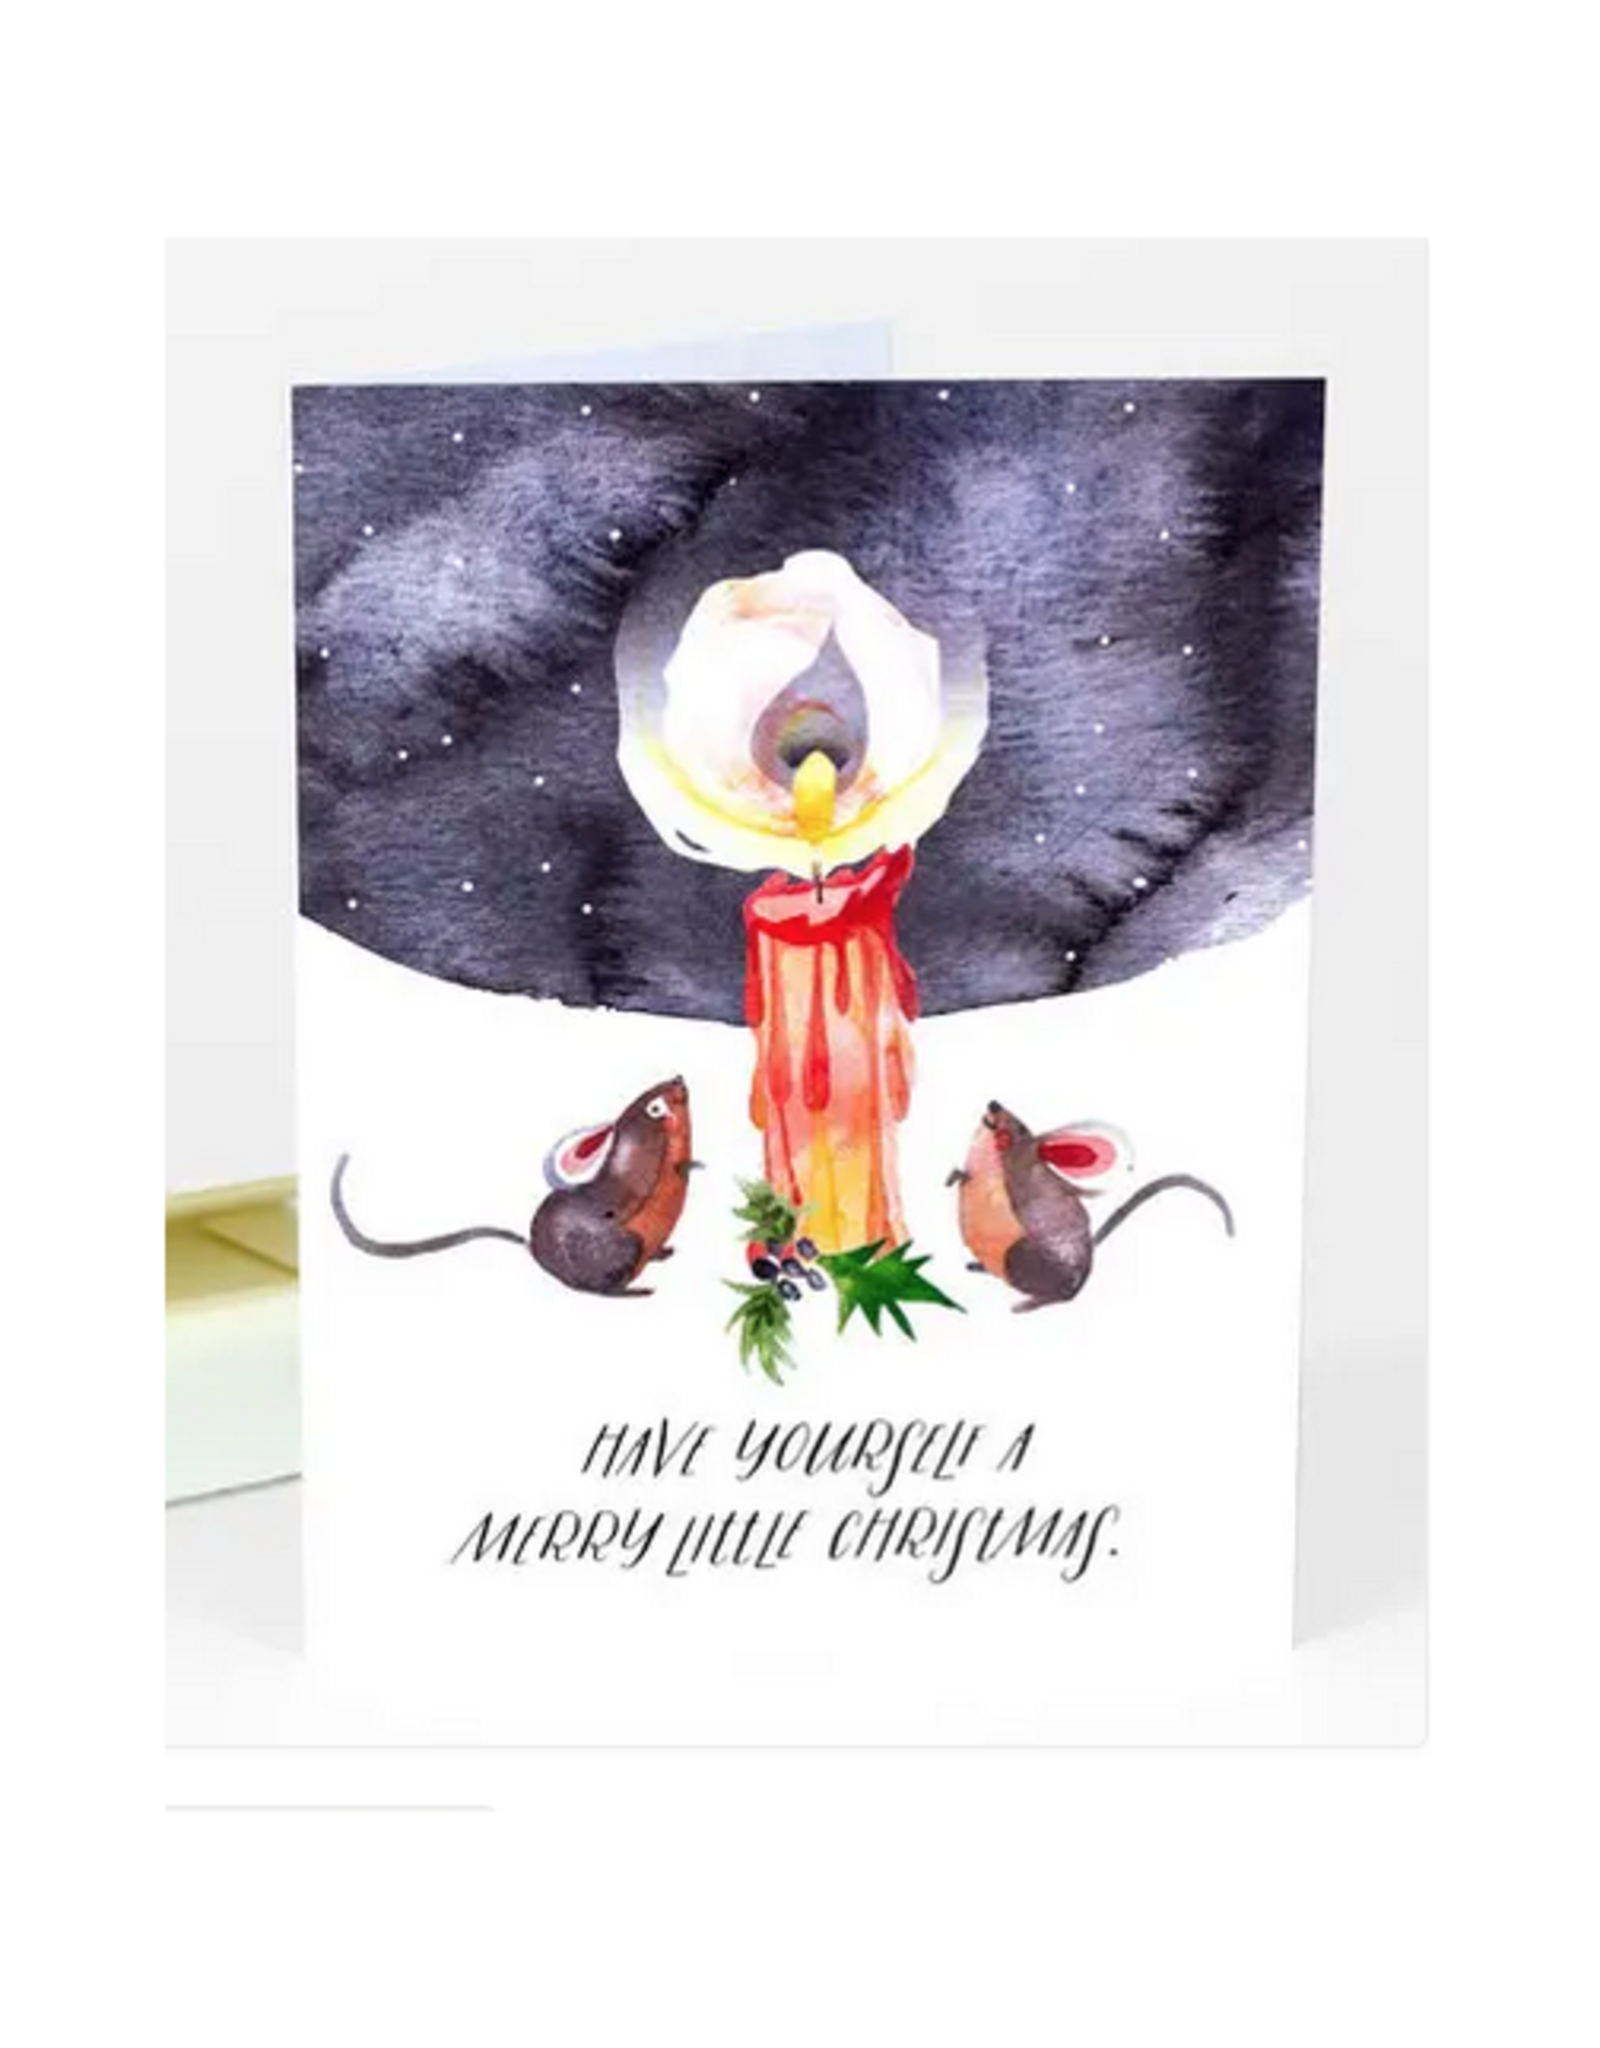 Merry Little Christmas Mice & Candle Greeting Card